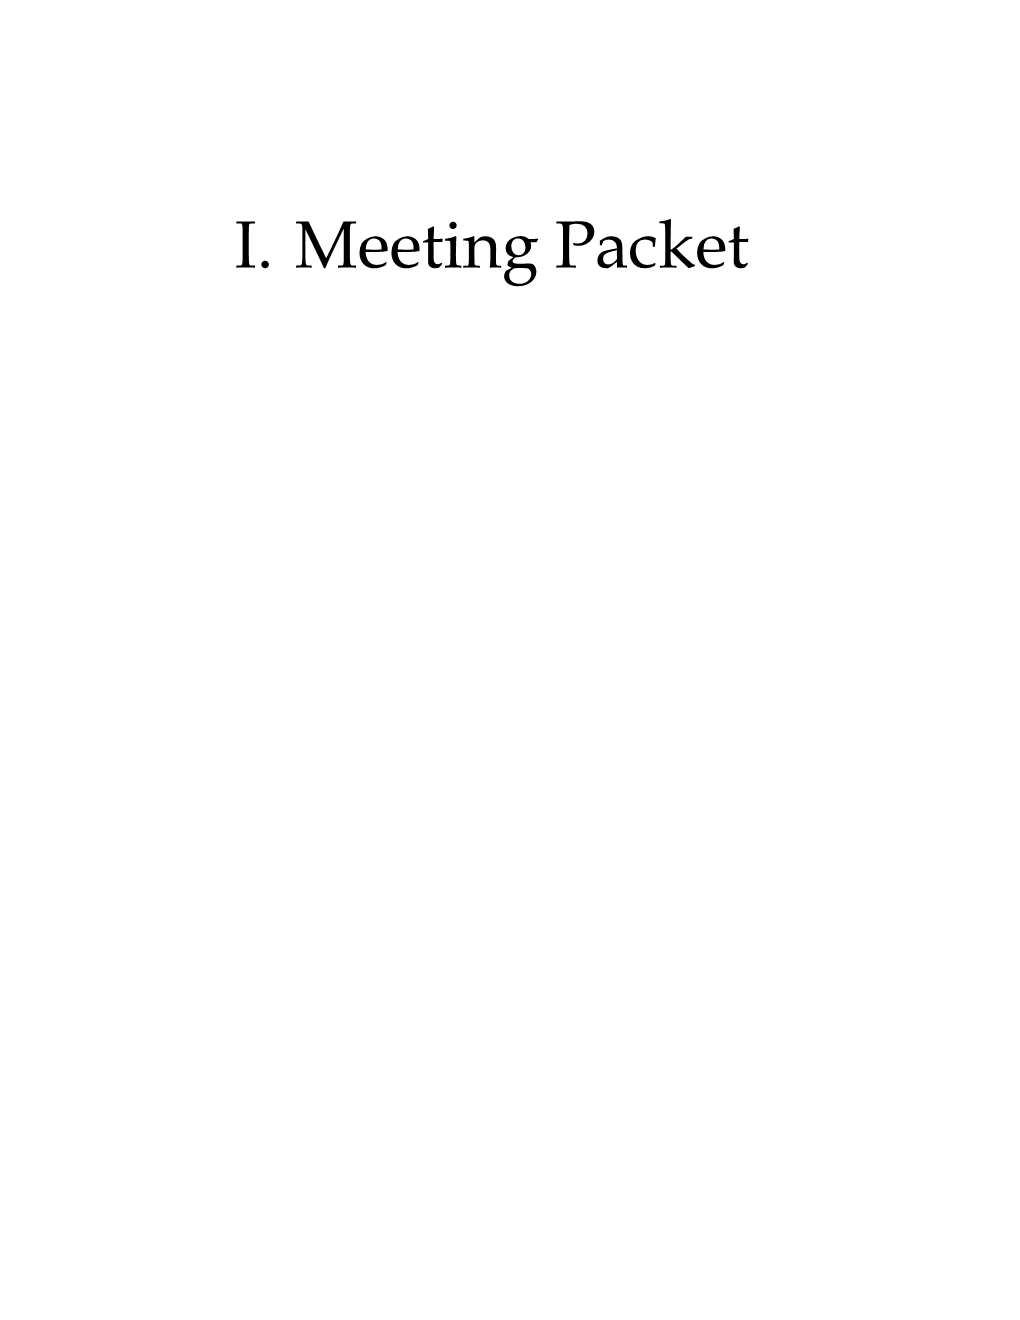 I. Meeting Packet State of Florida Public Service Commission INTERNAL AFFAIRS AGENDA Tuesday – July 28, 2020 9:30 Am Room 148 – Betty Easley Conference Center